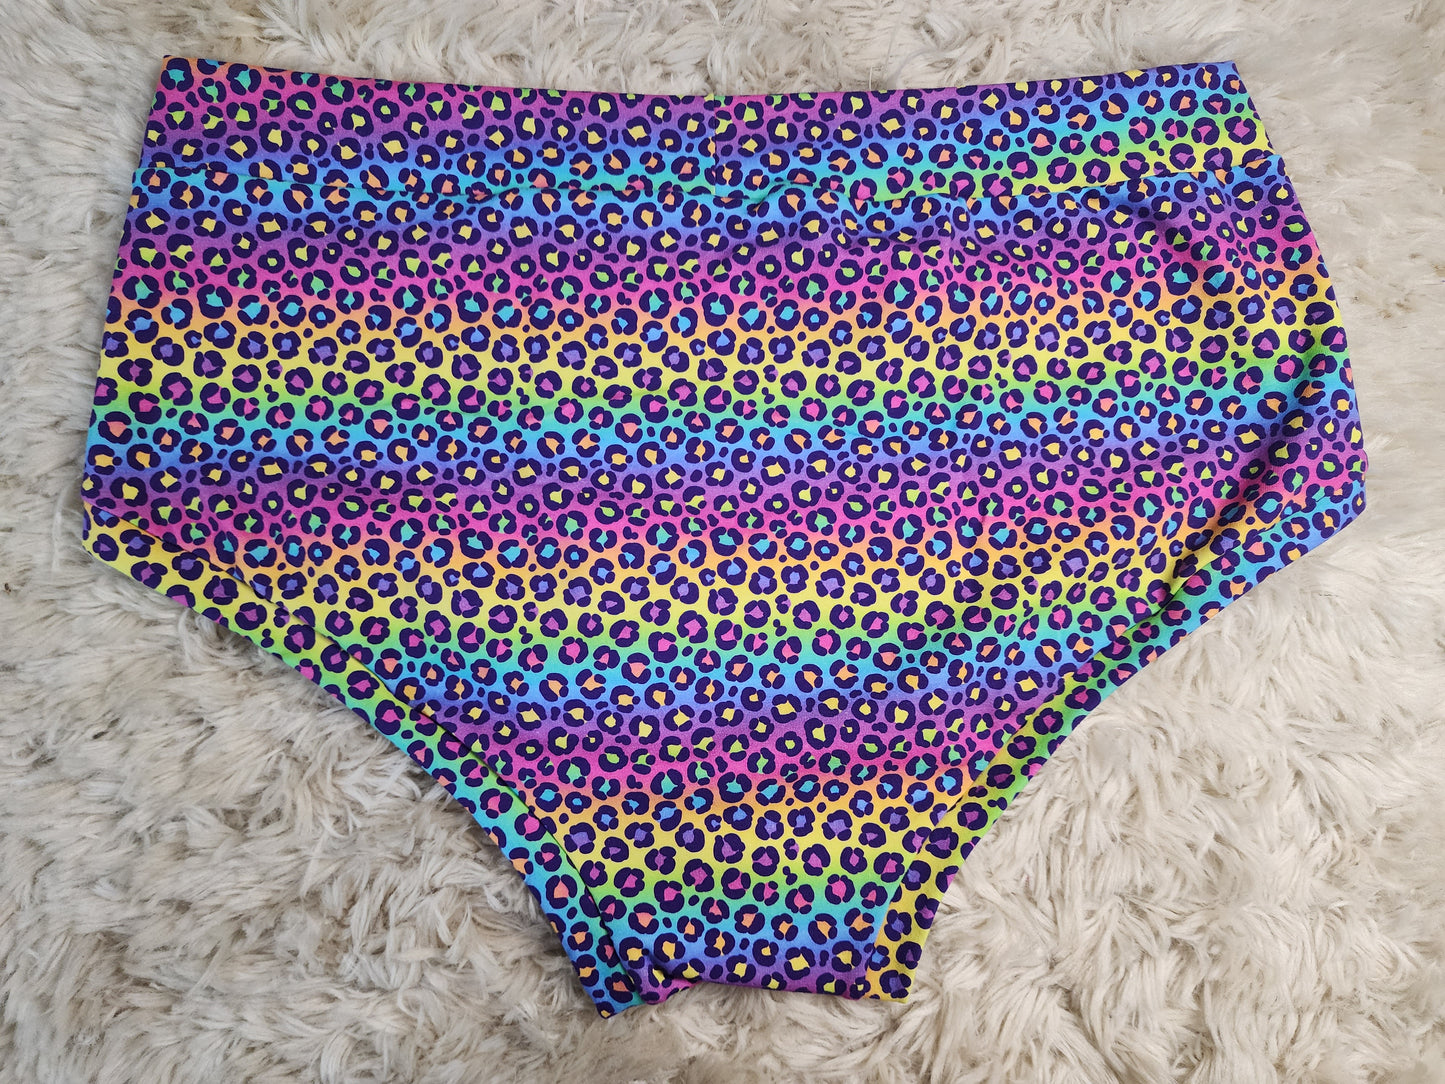 Med. Pride leopard pounch front briefs